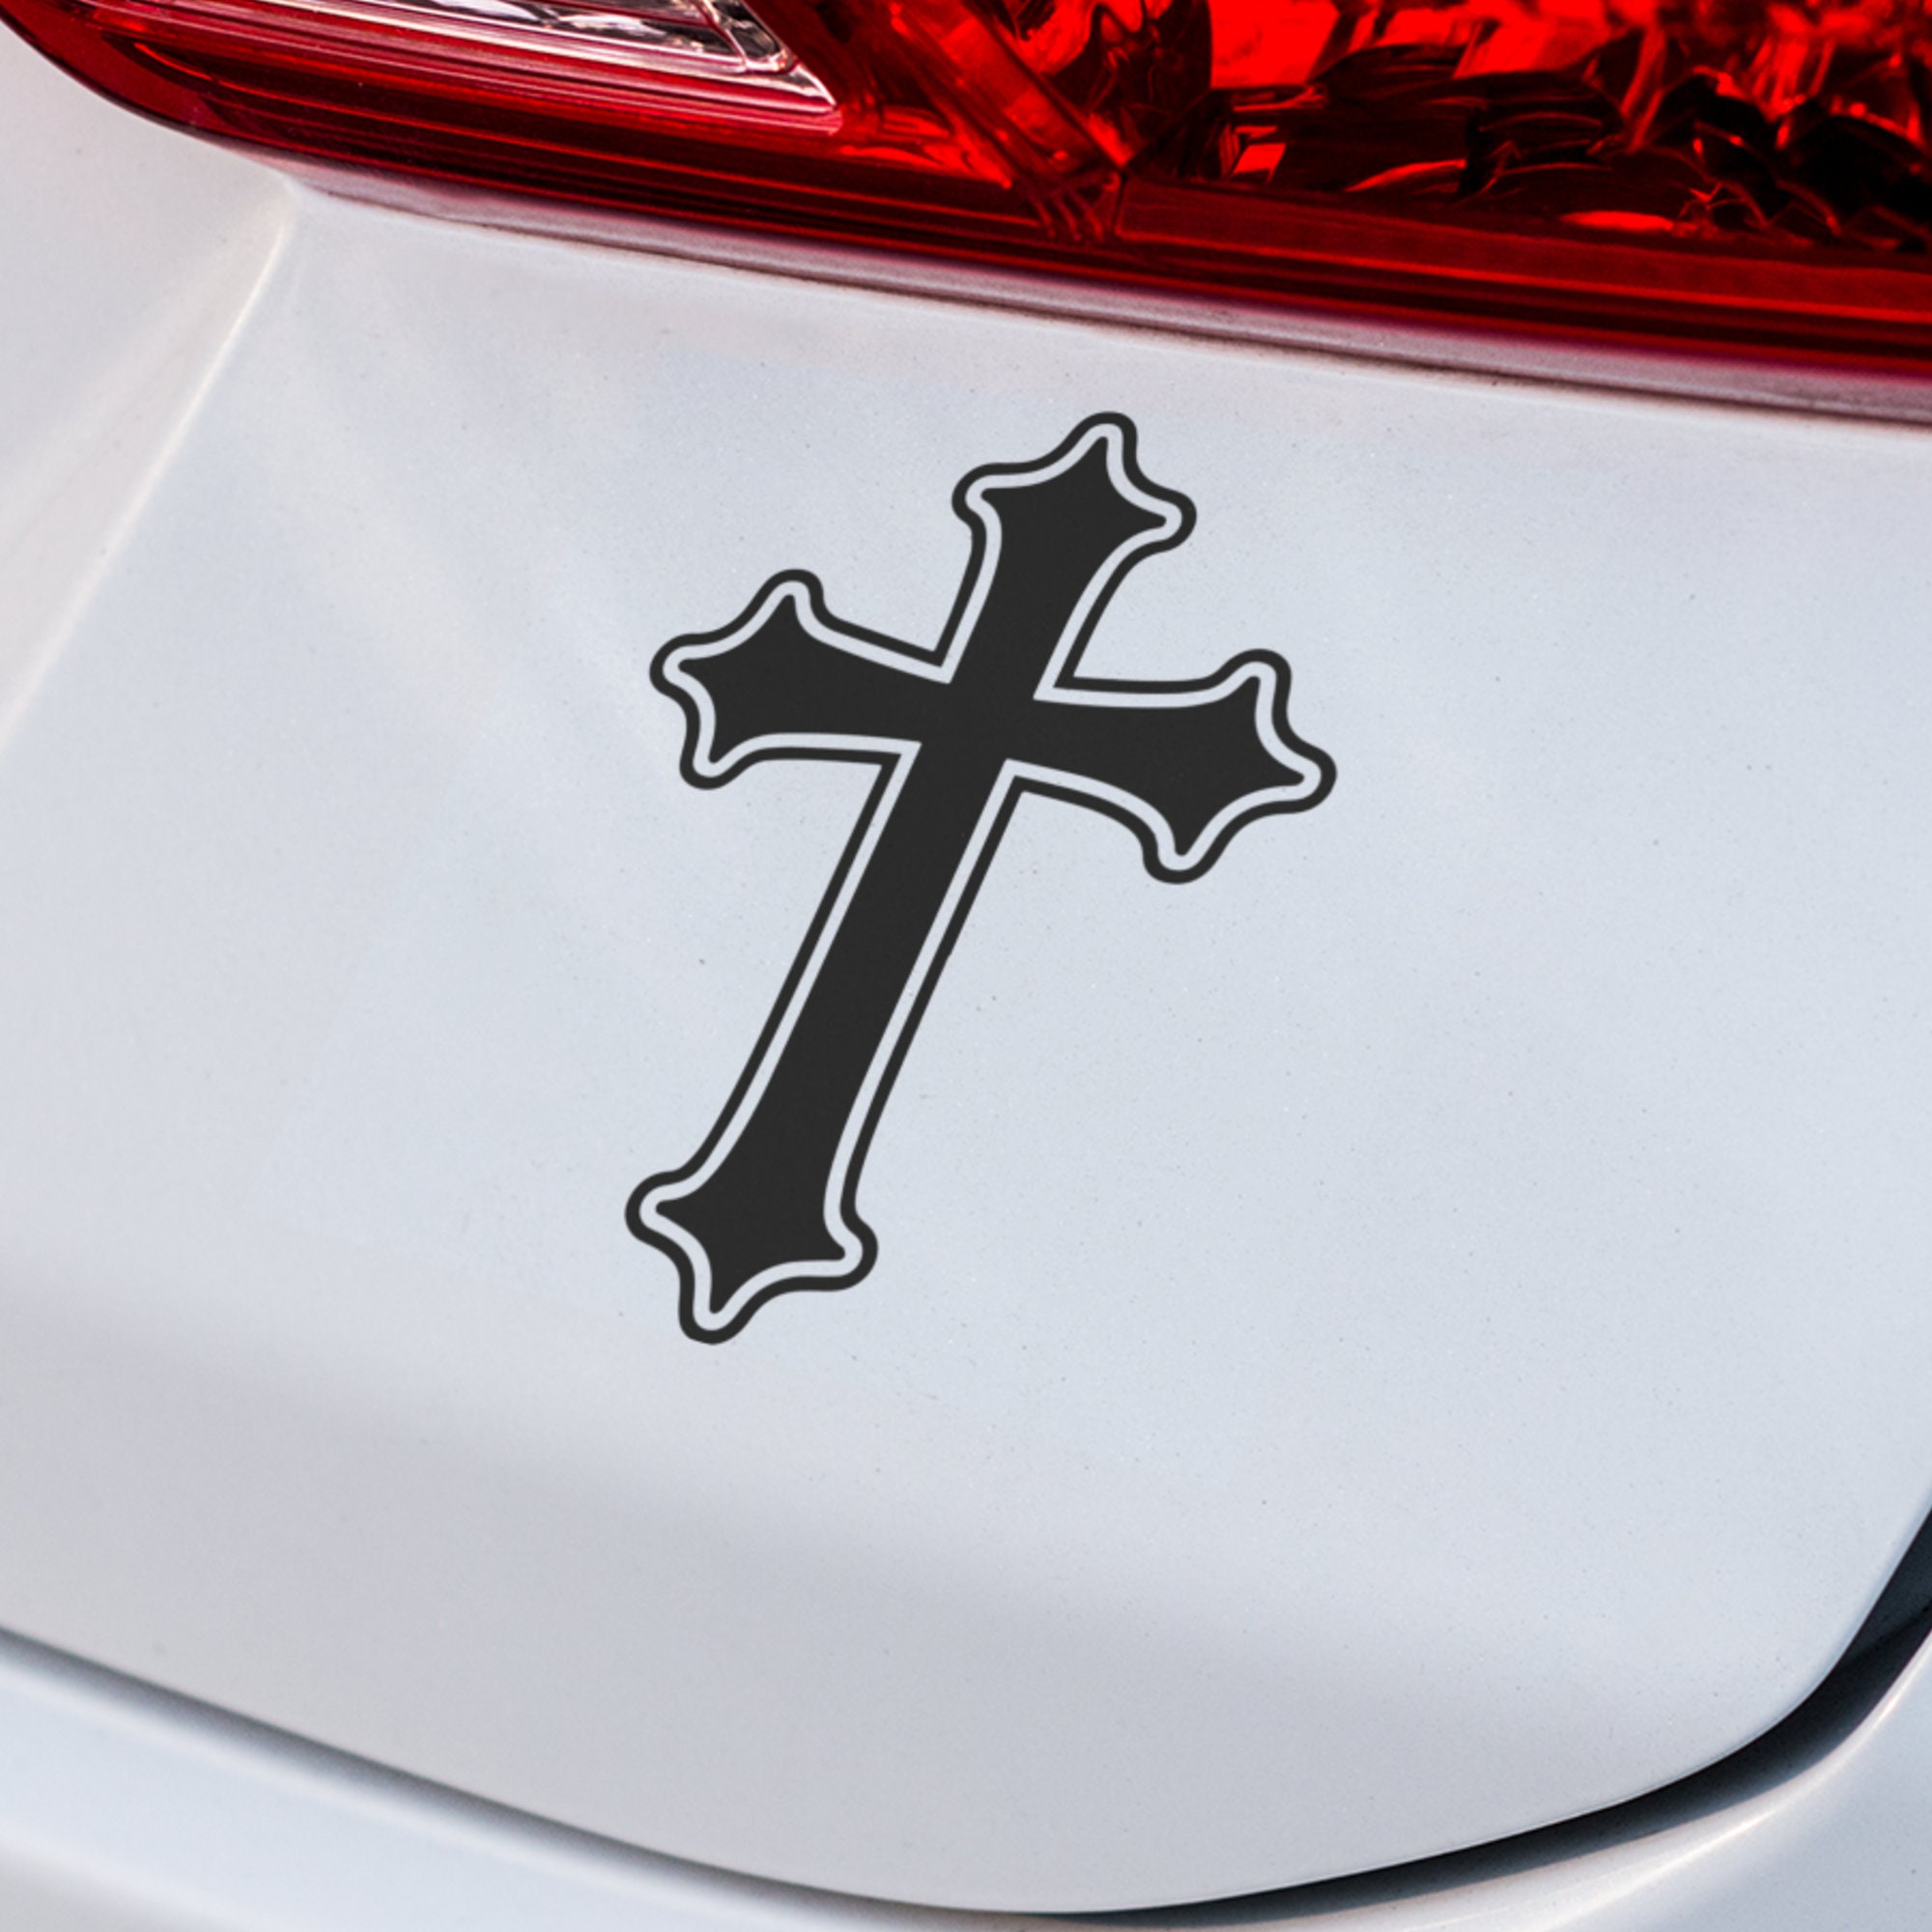 His Life Christian Christian Christian Stickers For Your Car And Trucks, Custom Made In the USA